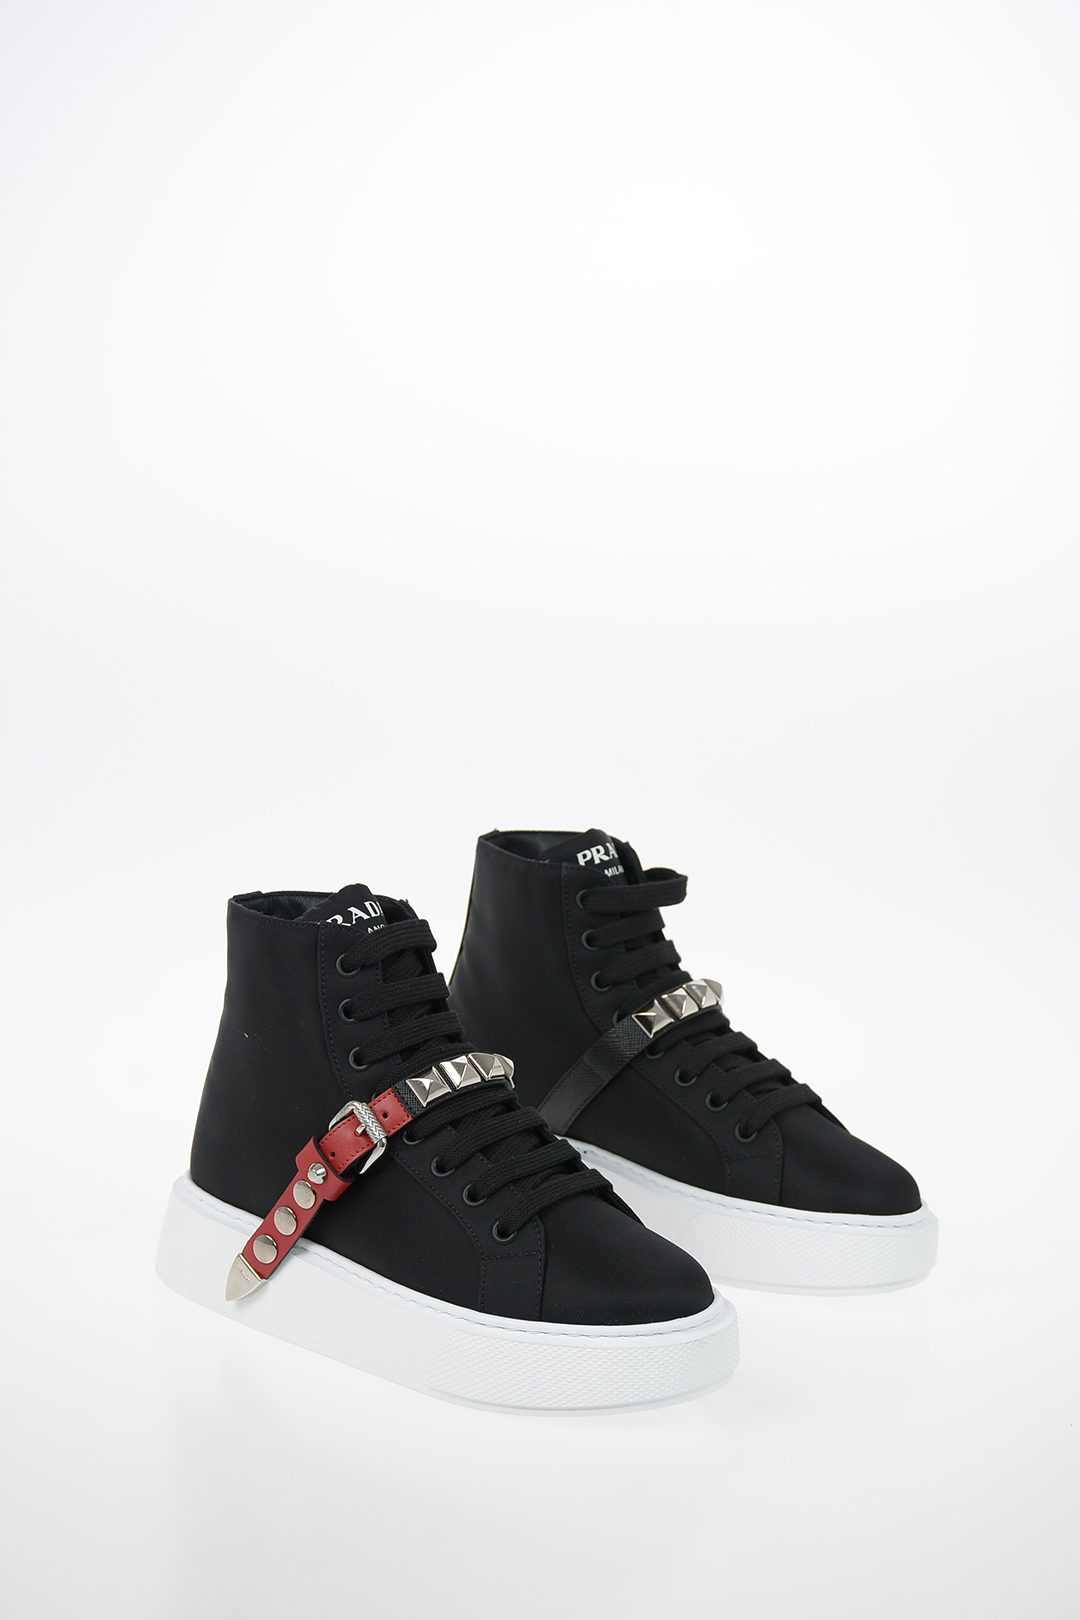 Prada Platform Sneakers with Studs women - Glamood Outlet